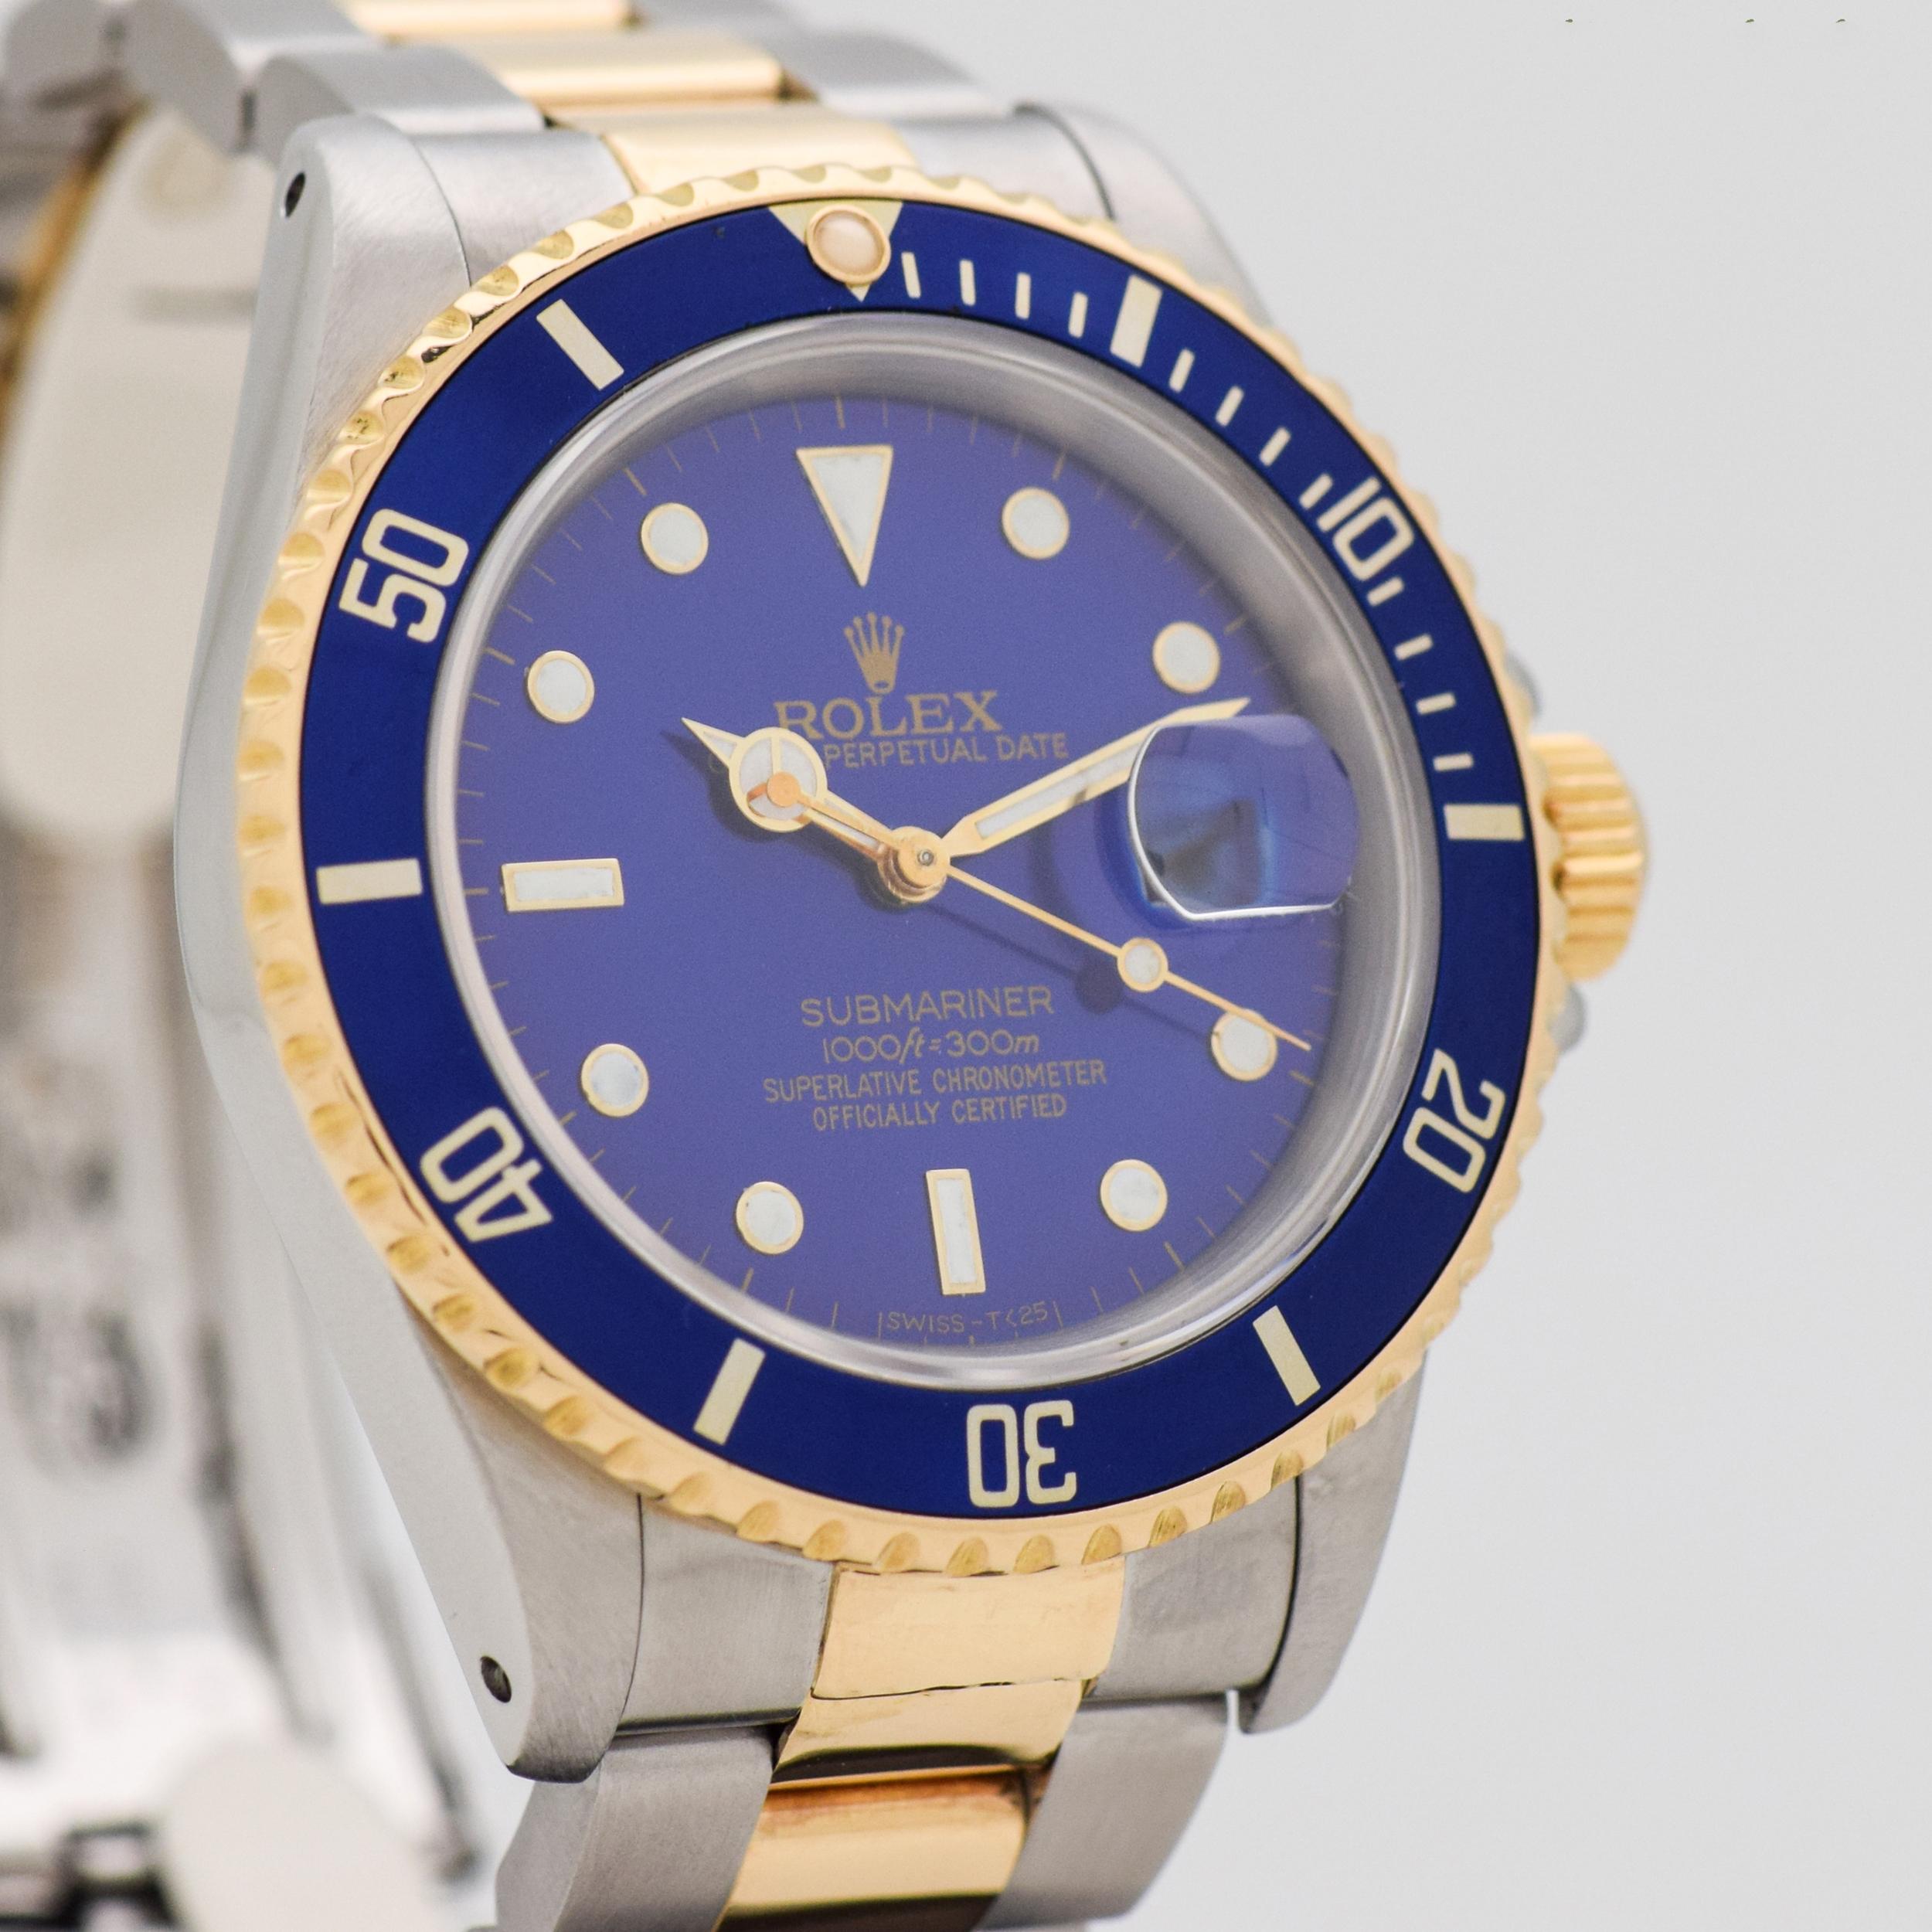 1989 Vintage Rolex Blue Submariner Ref. 16613 Two Tone 18k Yellow Gold and Stainless Steel watch with Blue Dial with White Gold Framed White Luminous Dot, Bar. and Triangle Markers with Original Rolex Two Tone 14k Yellow Gold and Stainless Steel